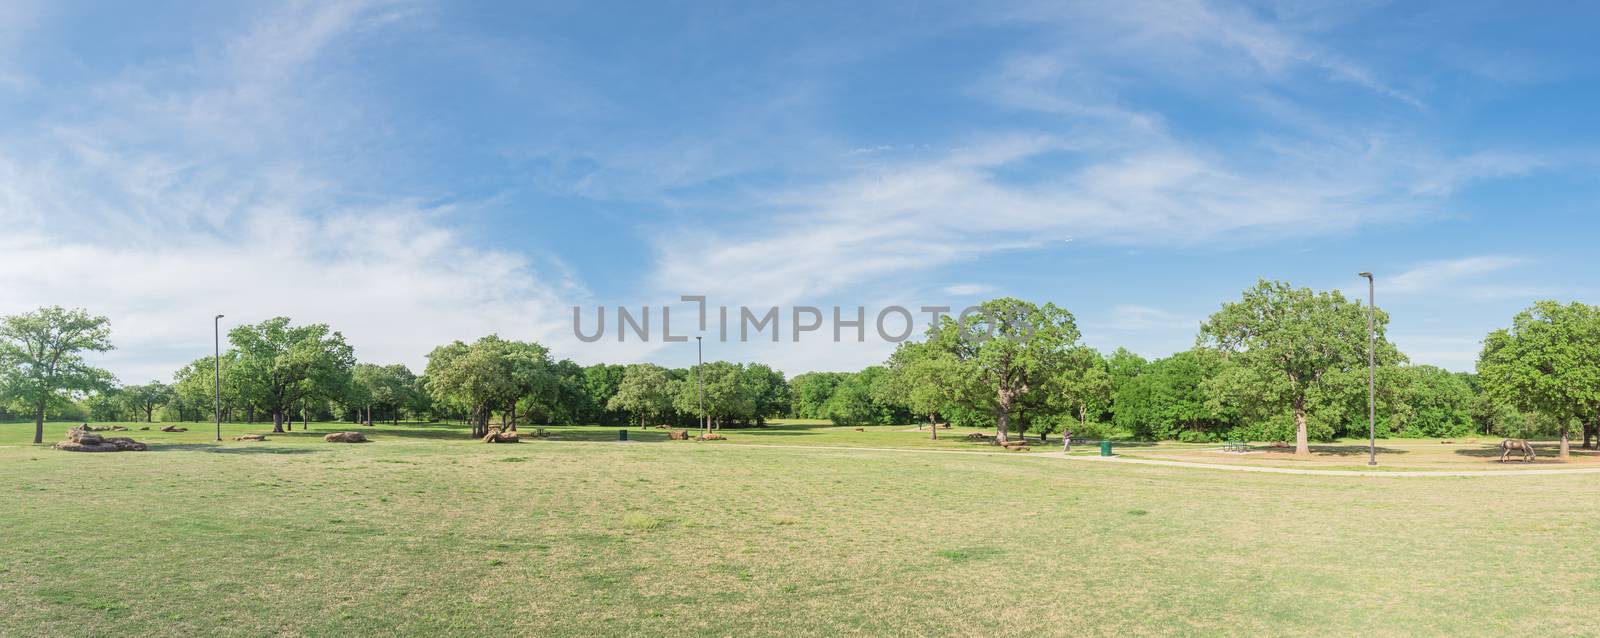 Panorama view natural urban park with grass lawn and tree lush in Texas, America